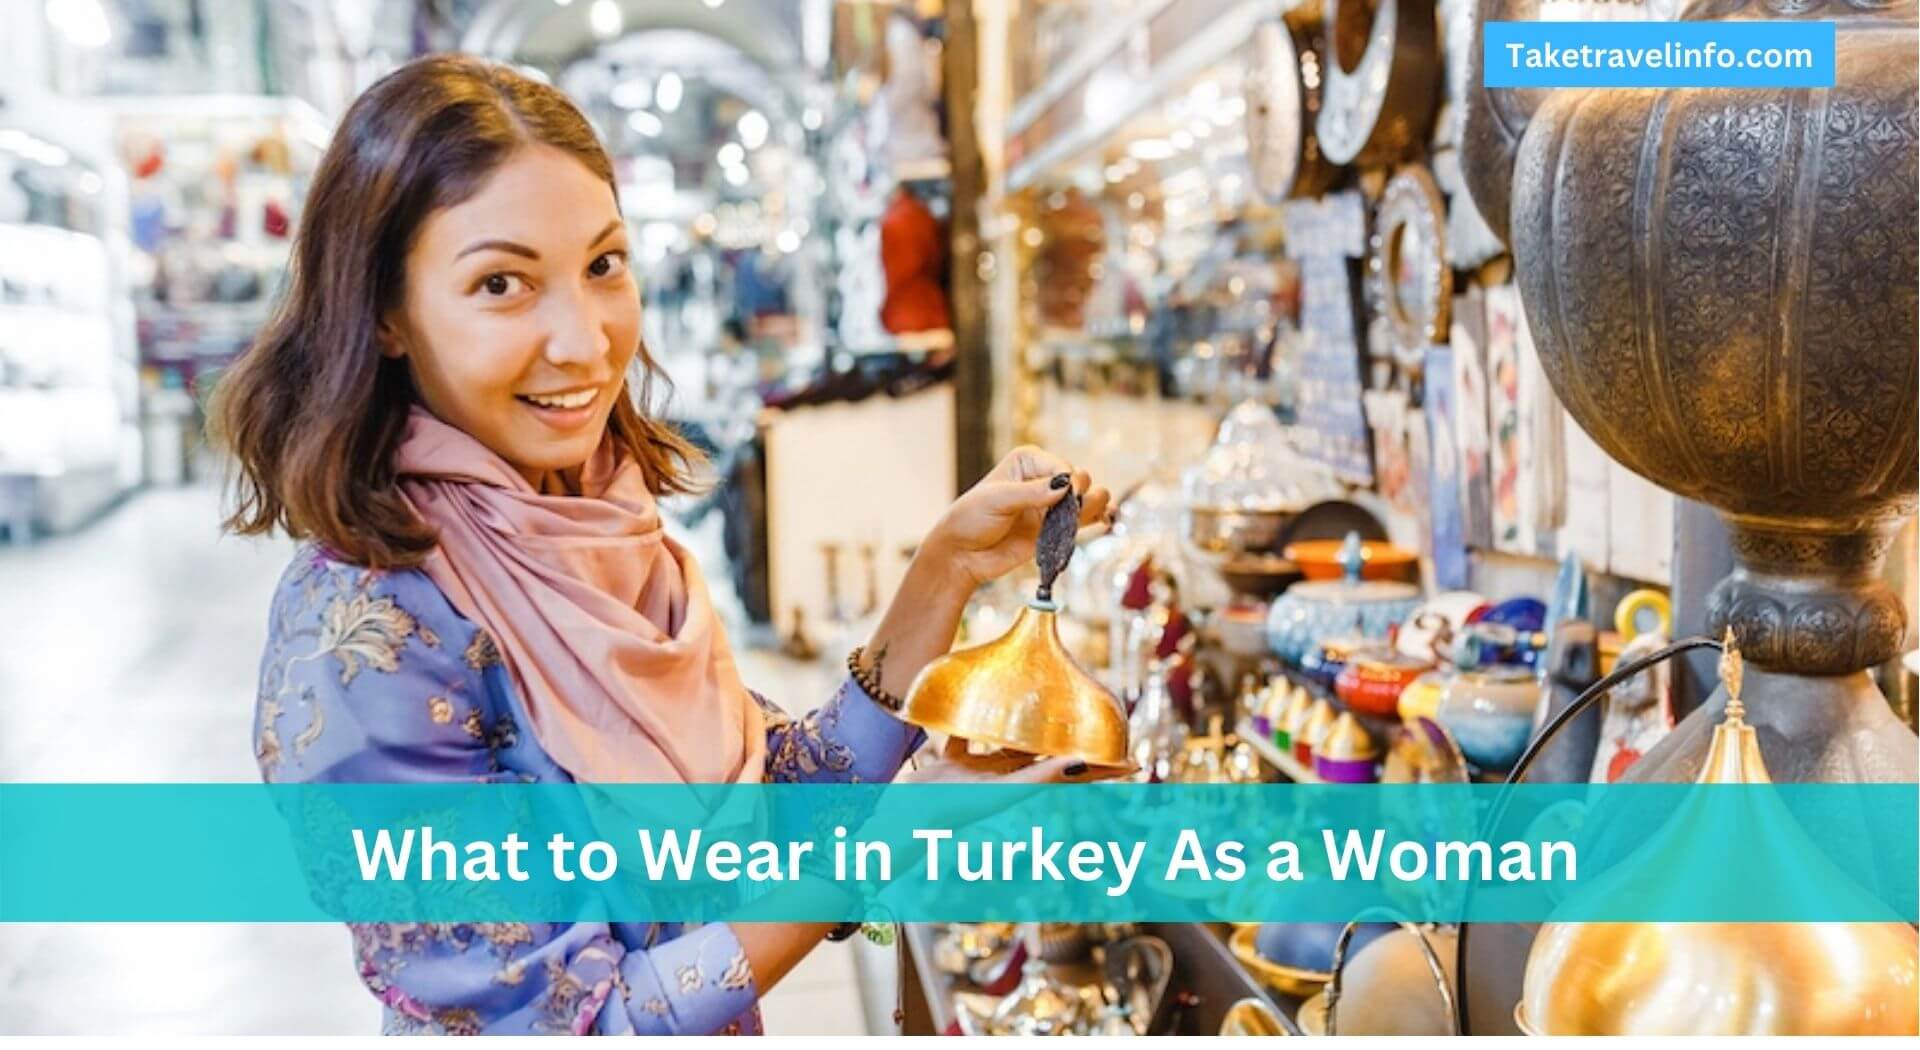 Is It Safe to Travel to Turkey As a Woman